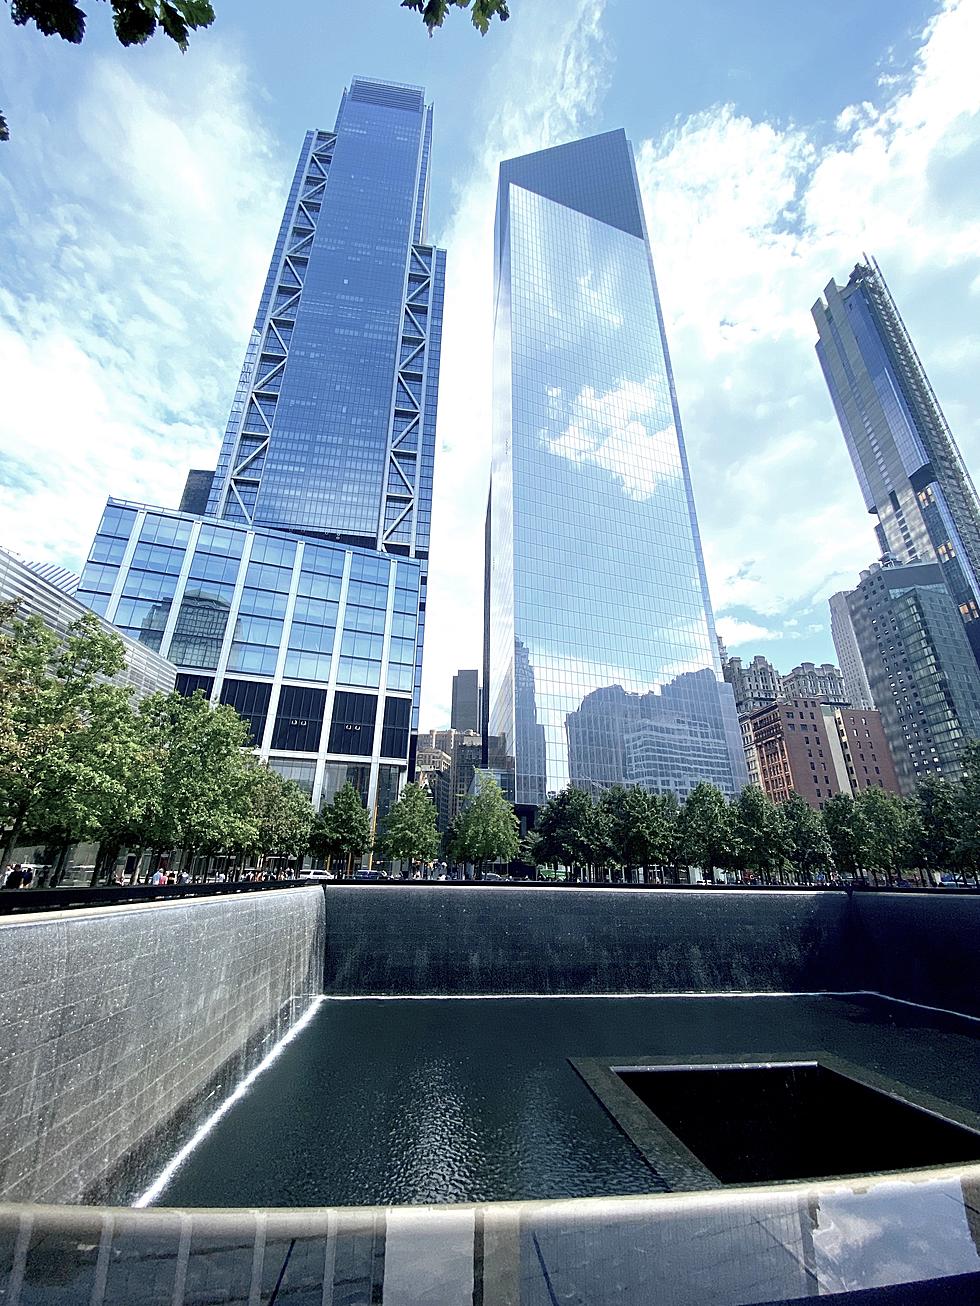 9/11 Museum Sets Somber Tone For Mourning, Healing And To Never Forget